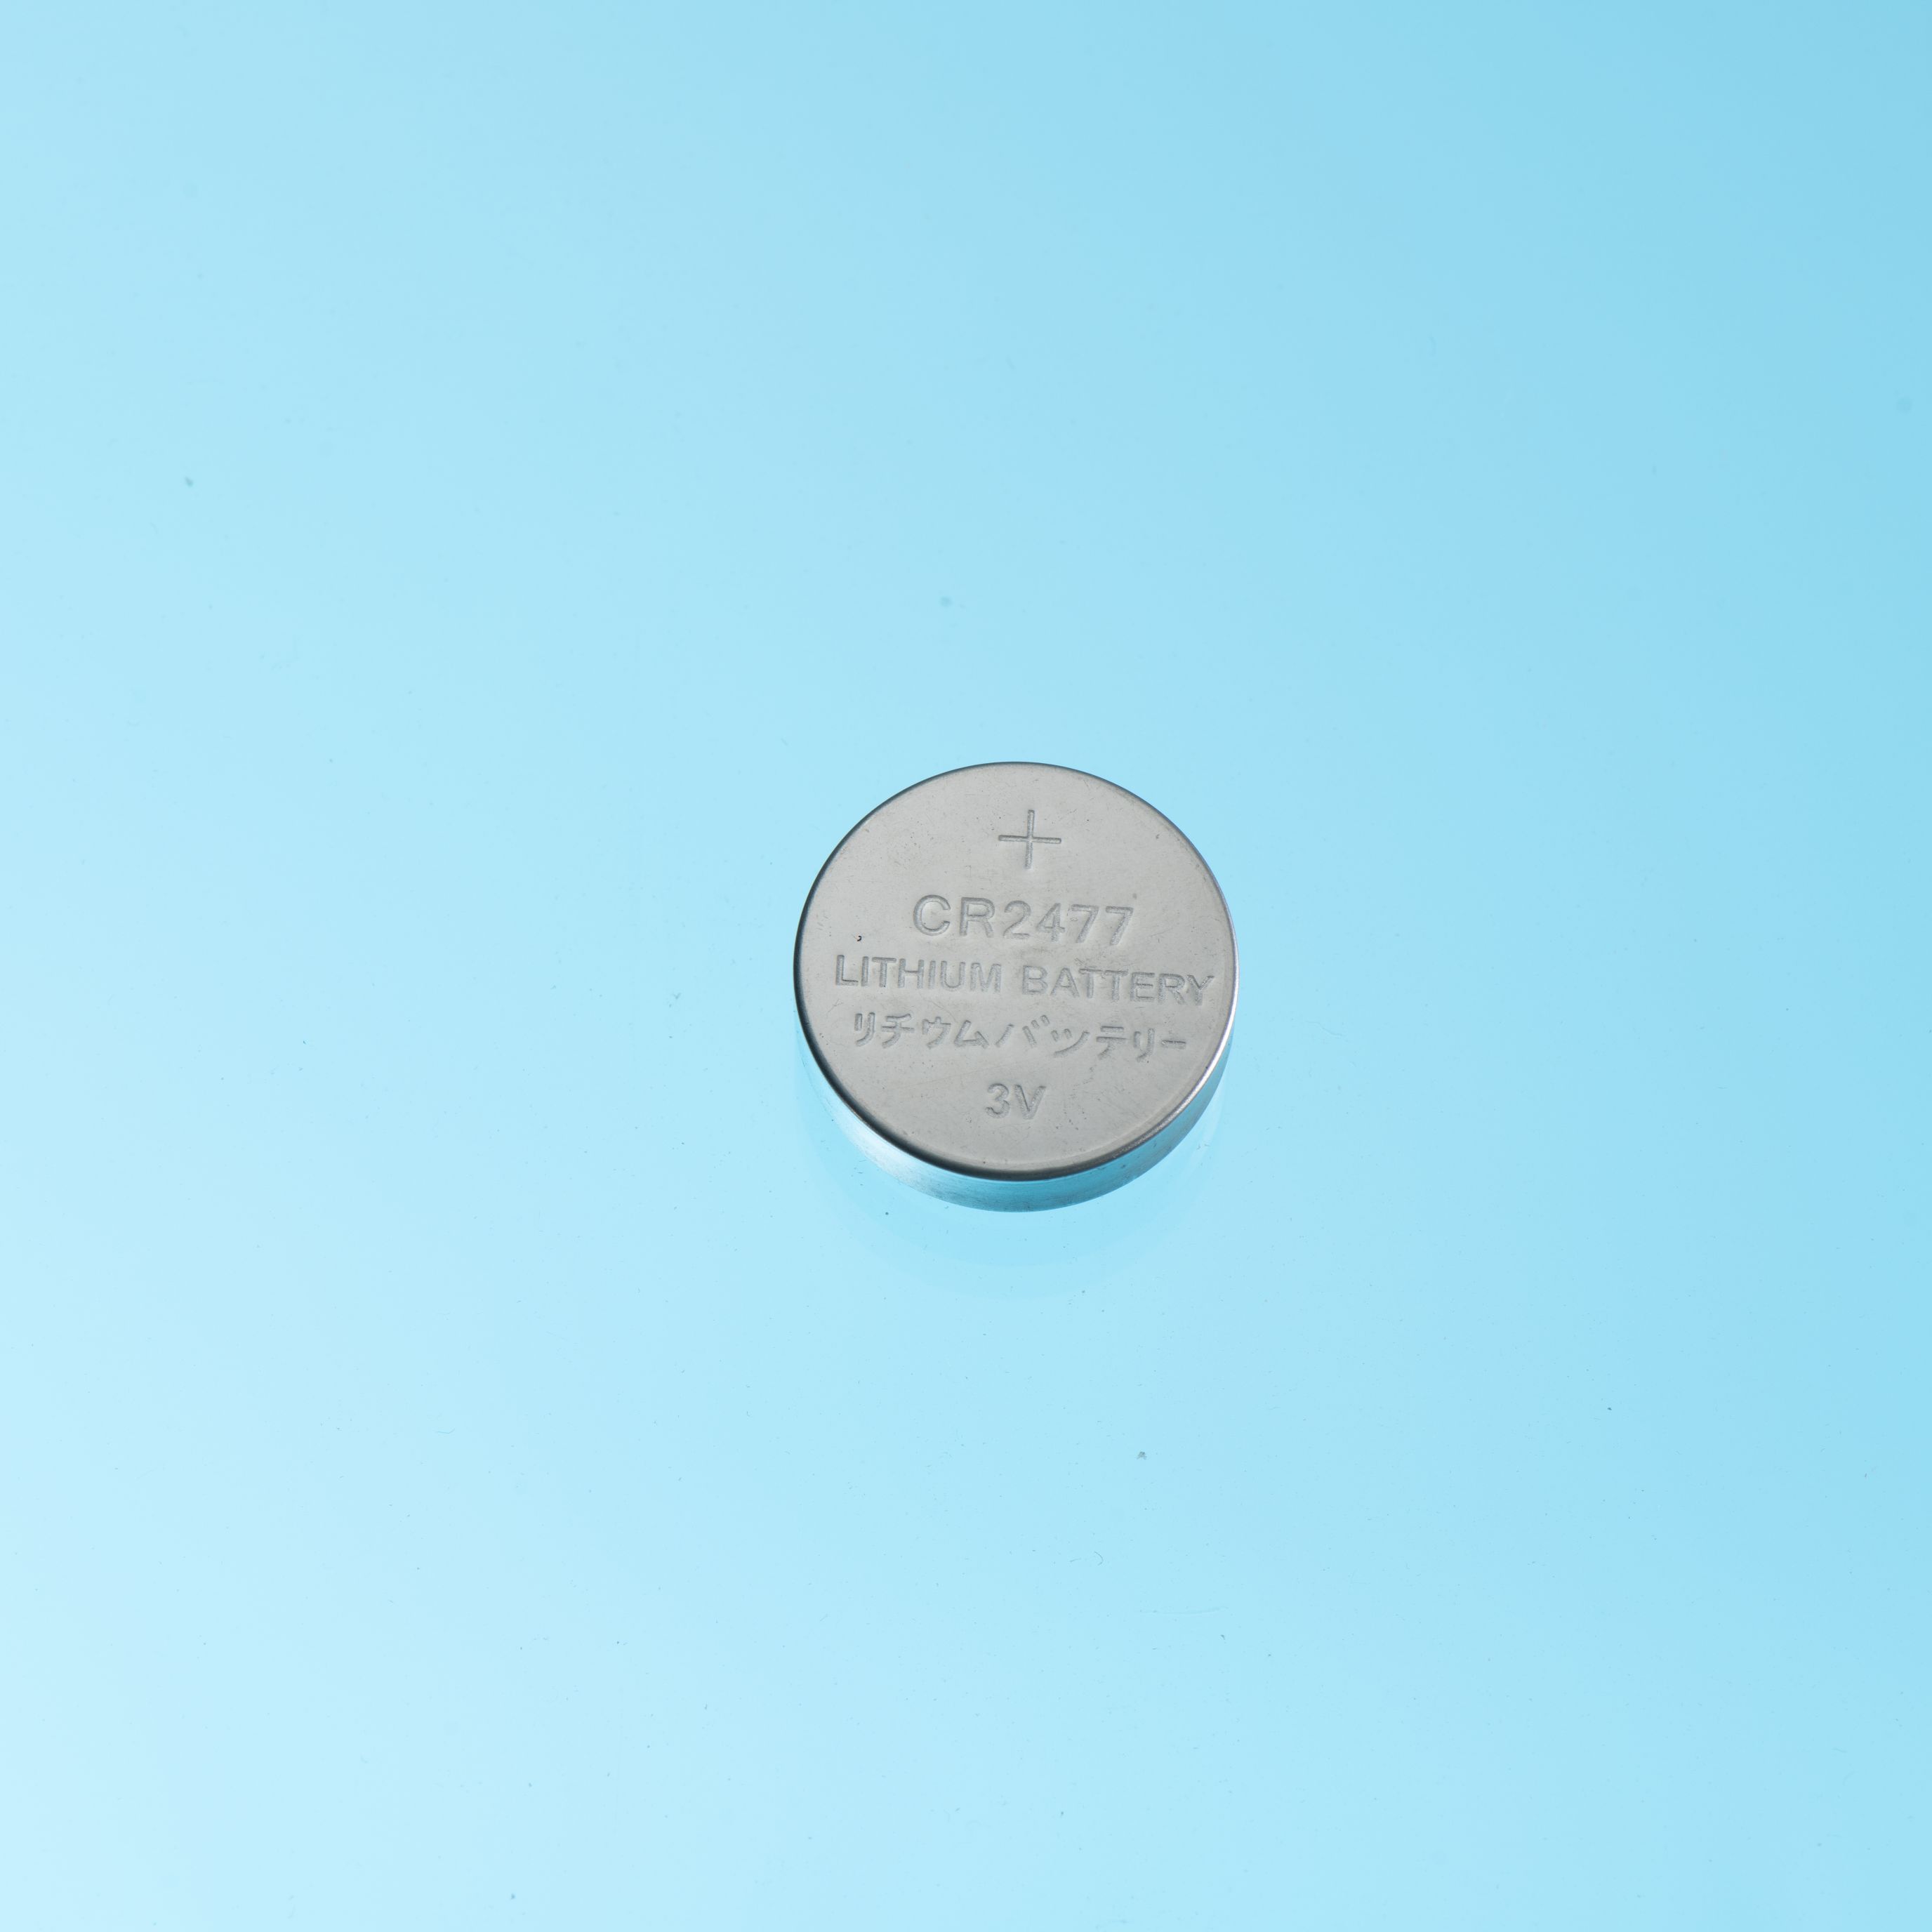 CR2477 high-capacity instrumentation IOT remote control water meter electric meter 3V button cell